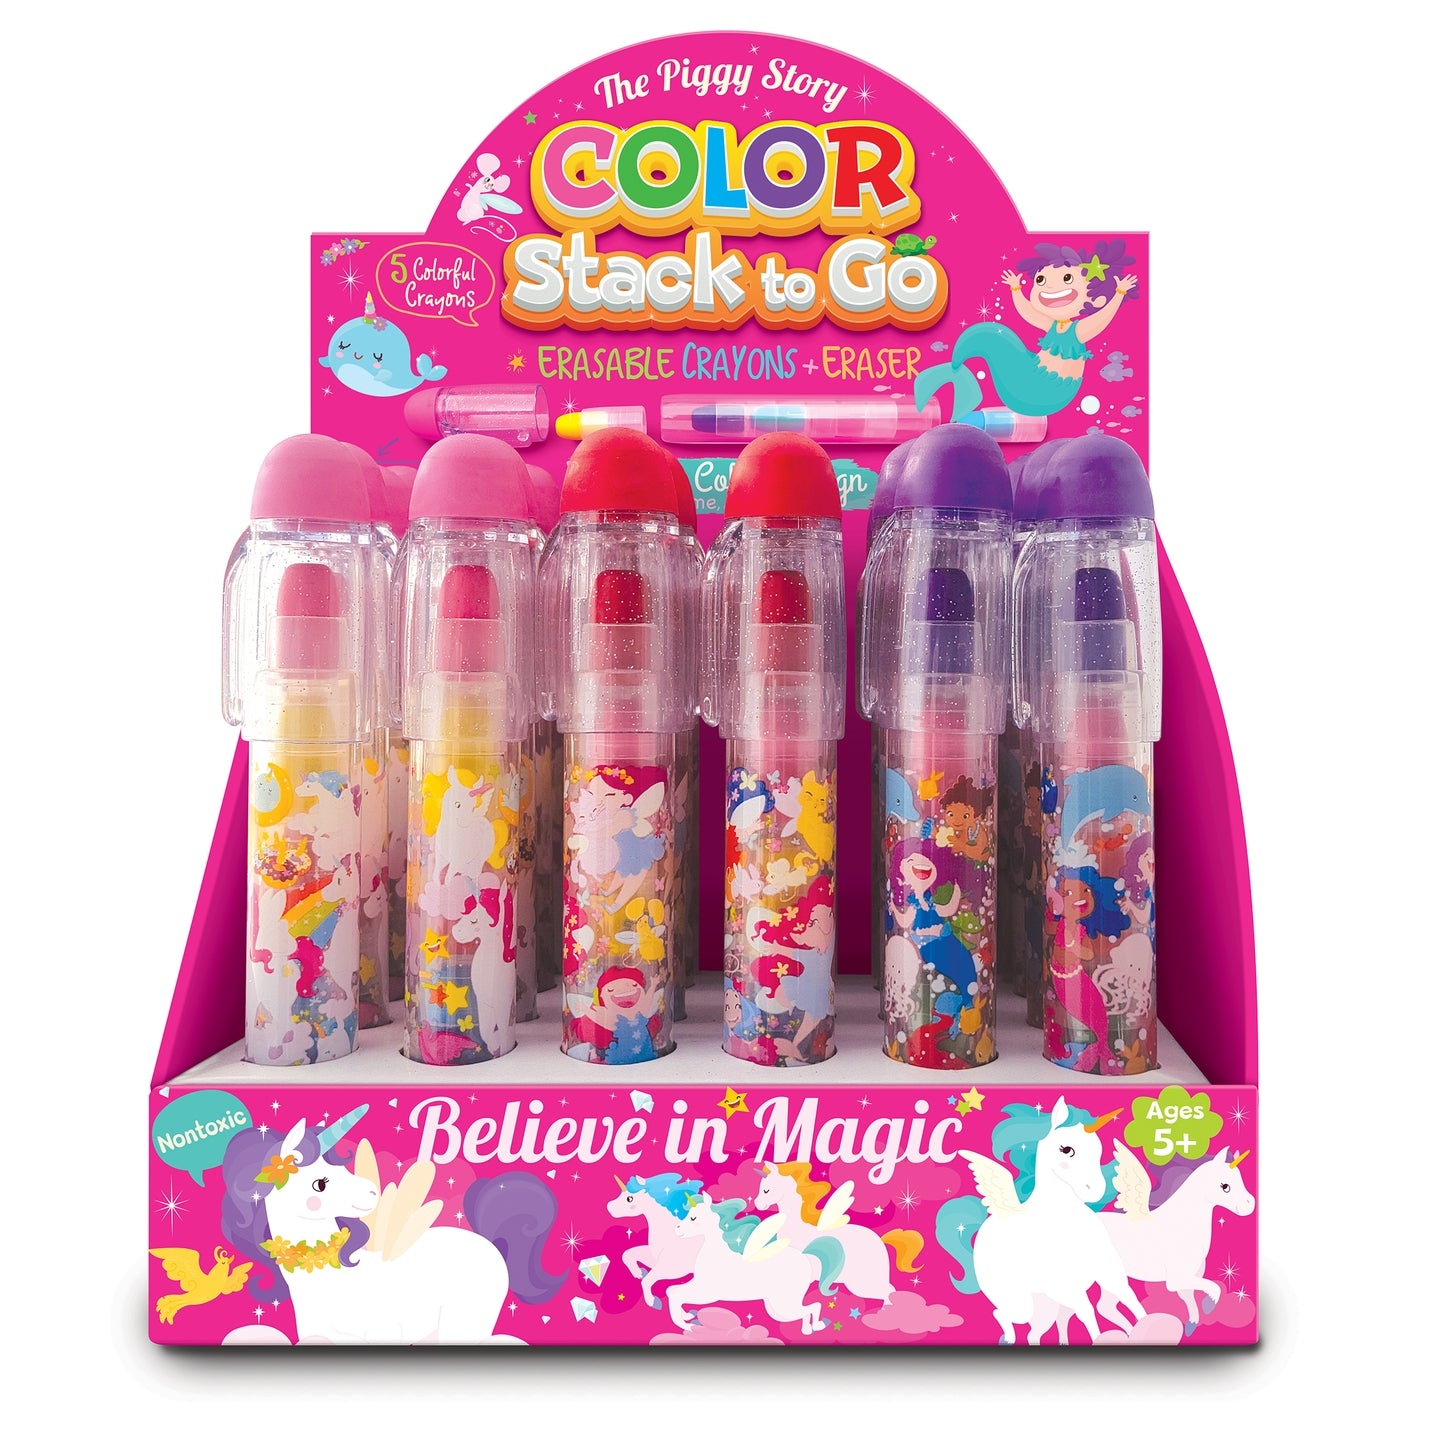 Color Stack To Go Erasable Crayons - Believe in Magic - Twinkle Twinkle Little One